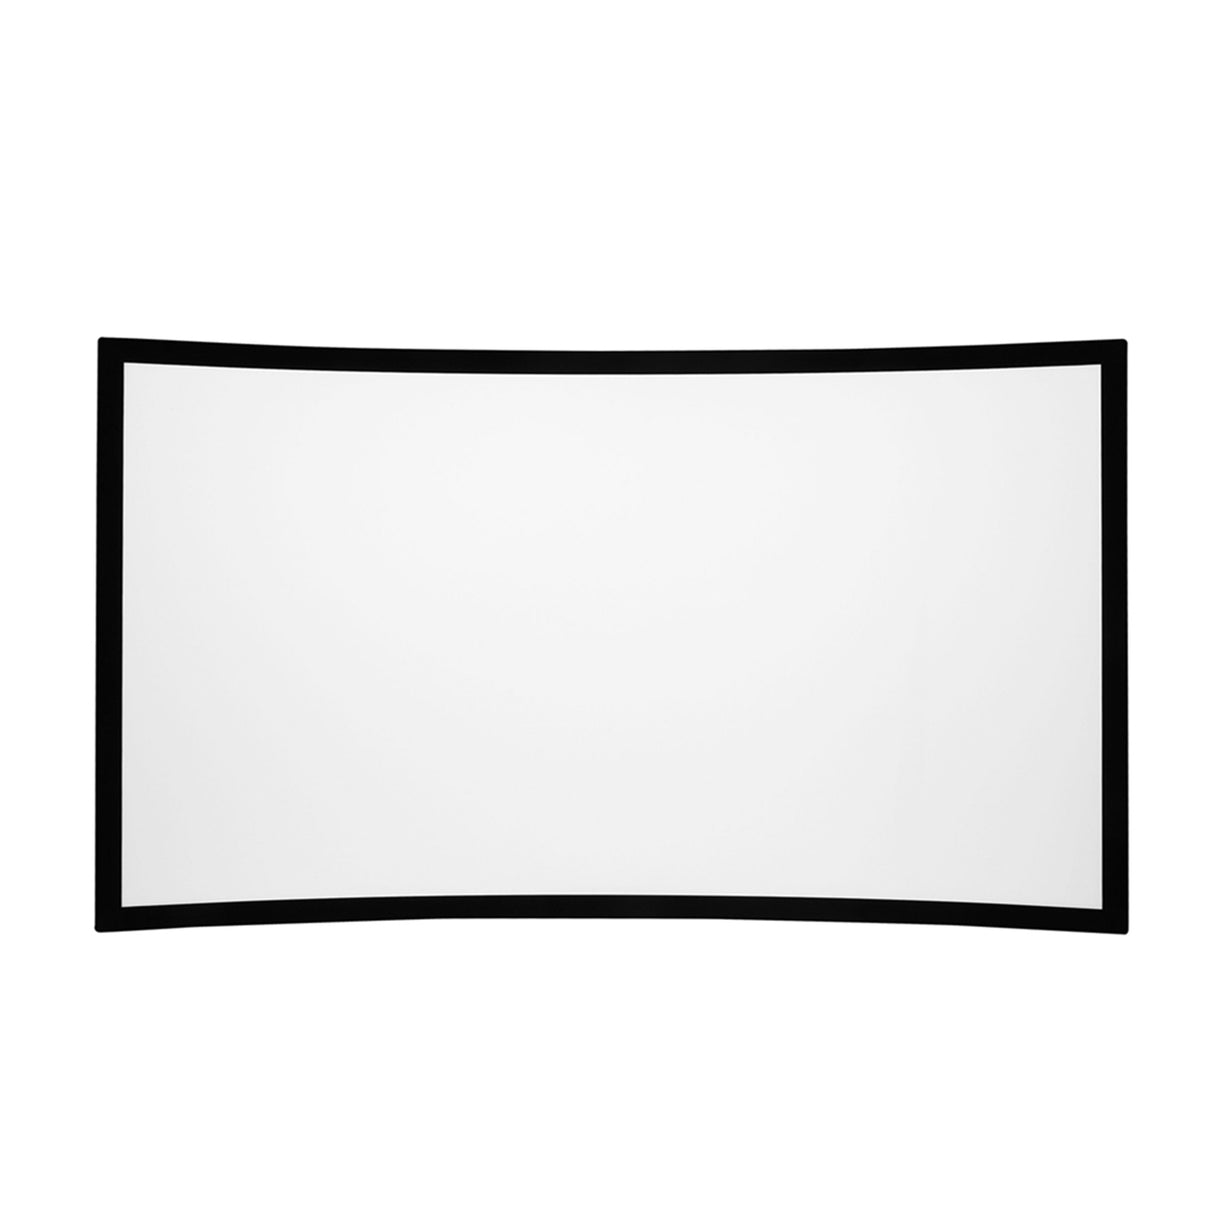 Prime Fixed-frame Curved projector screen with acoustically transparent perforated white fabric (92")